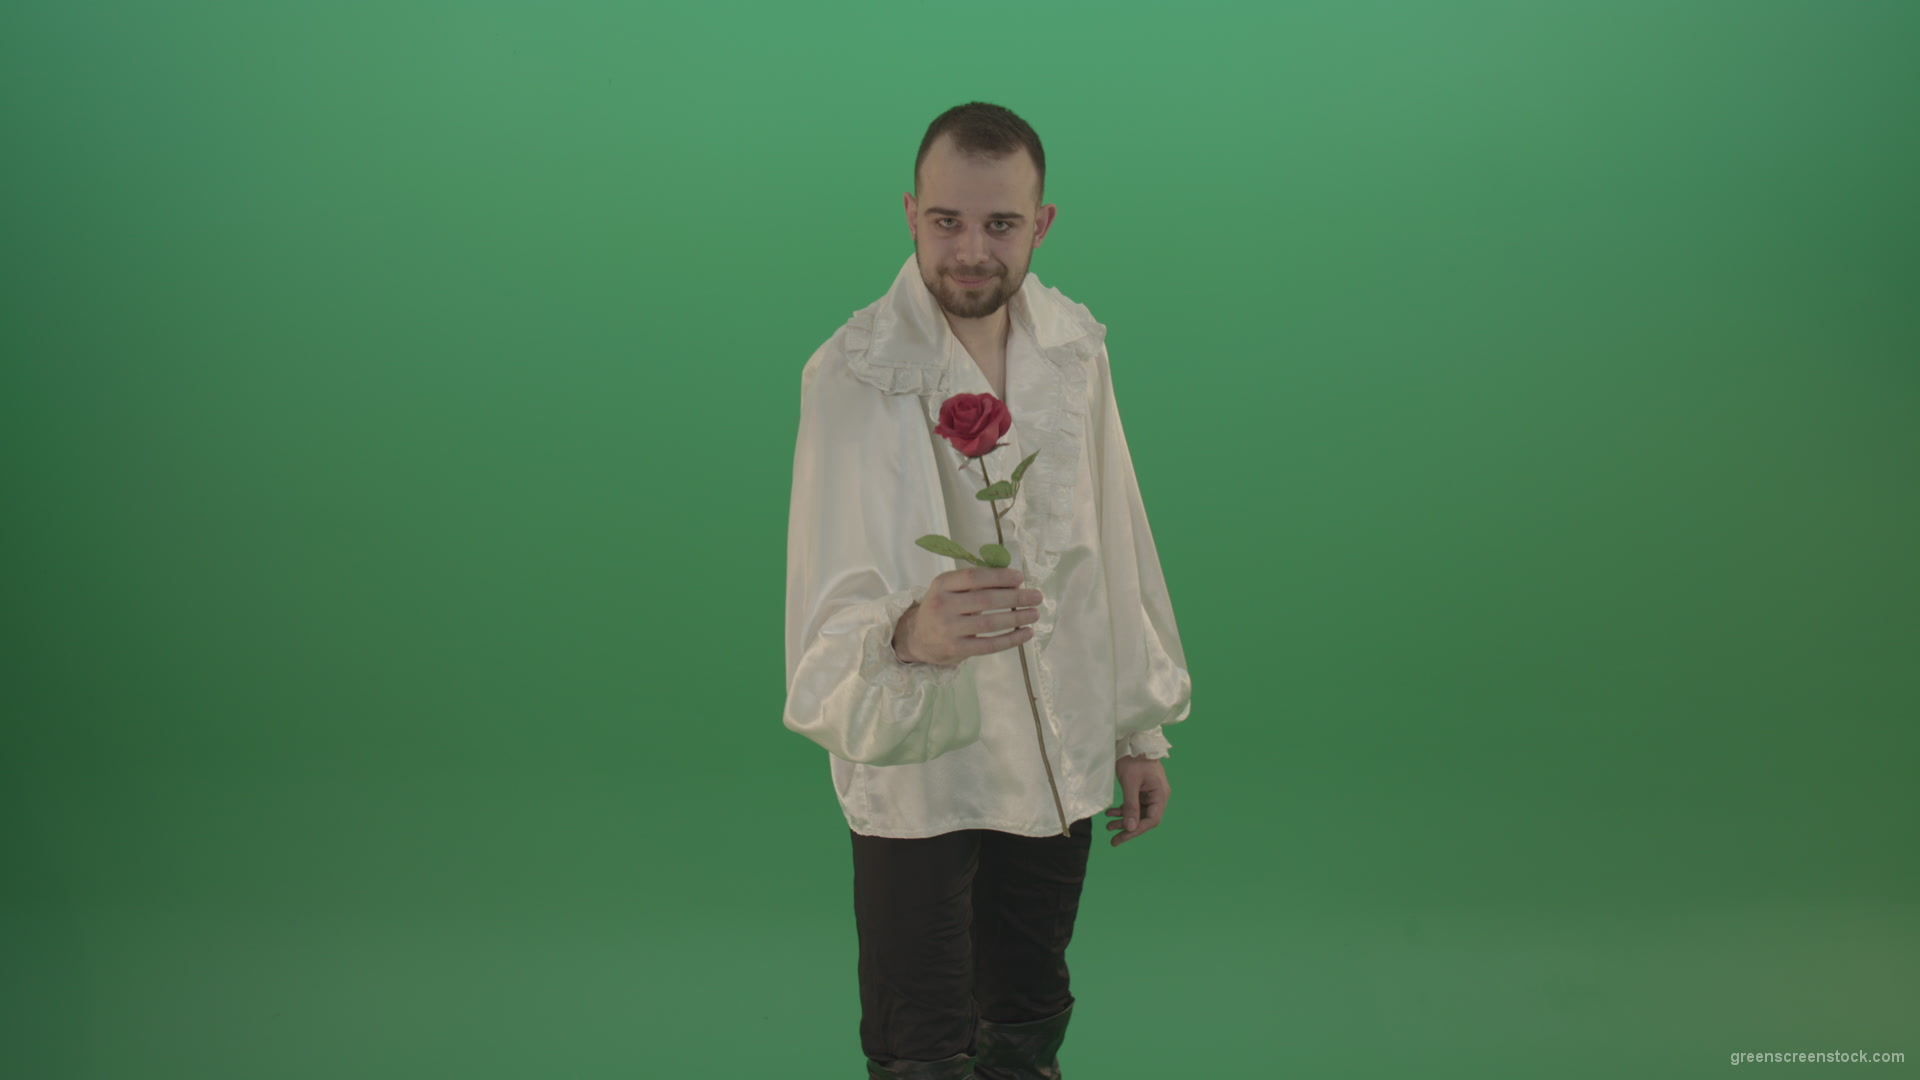 Glancing-at-the-red-flower-the-guy-gives-love-rose-to-camera-isolated-on-green-screen_008 Green Screen Stock